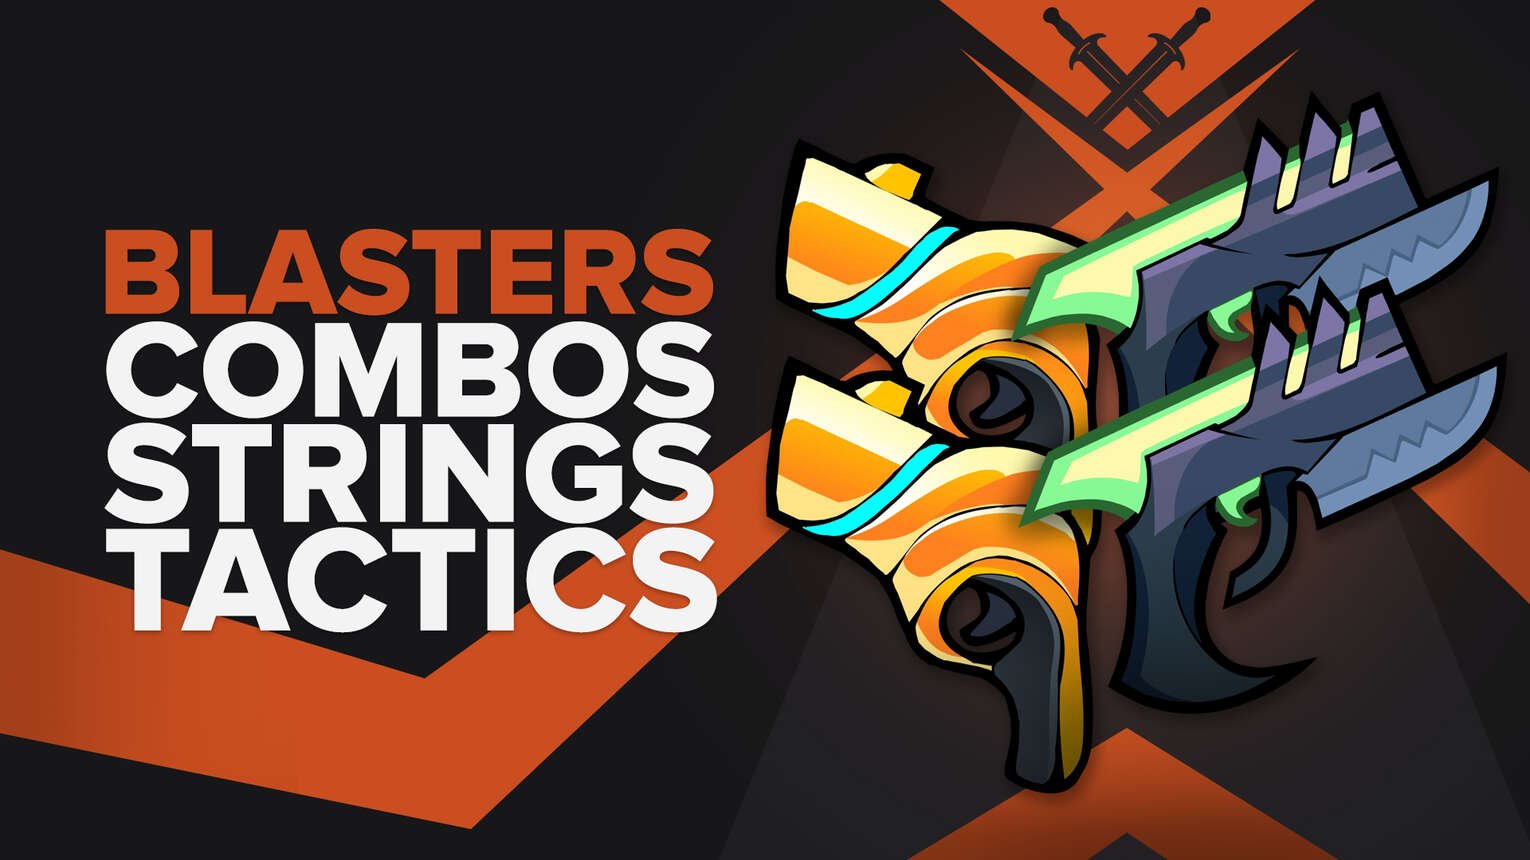 Best Blasters Combos, Strings, and Tips in Brawlhalla